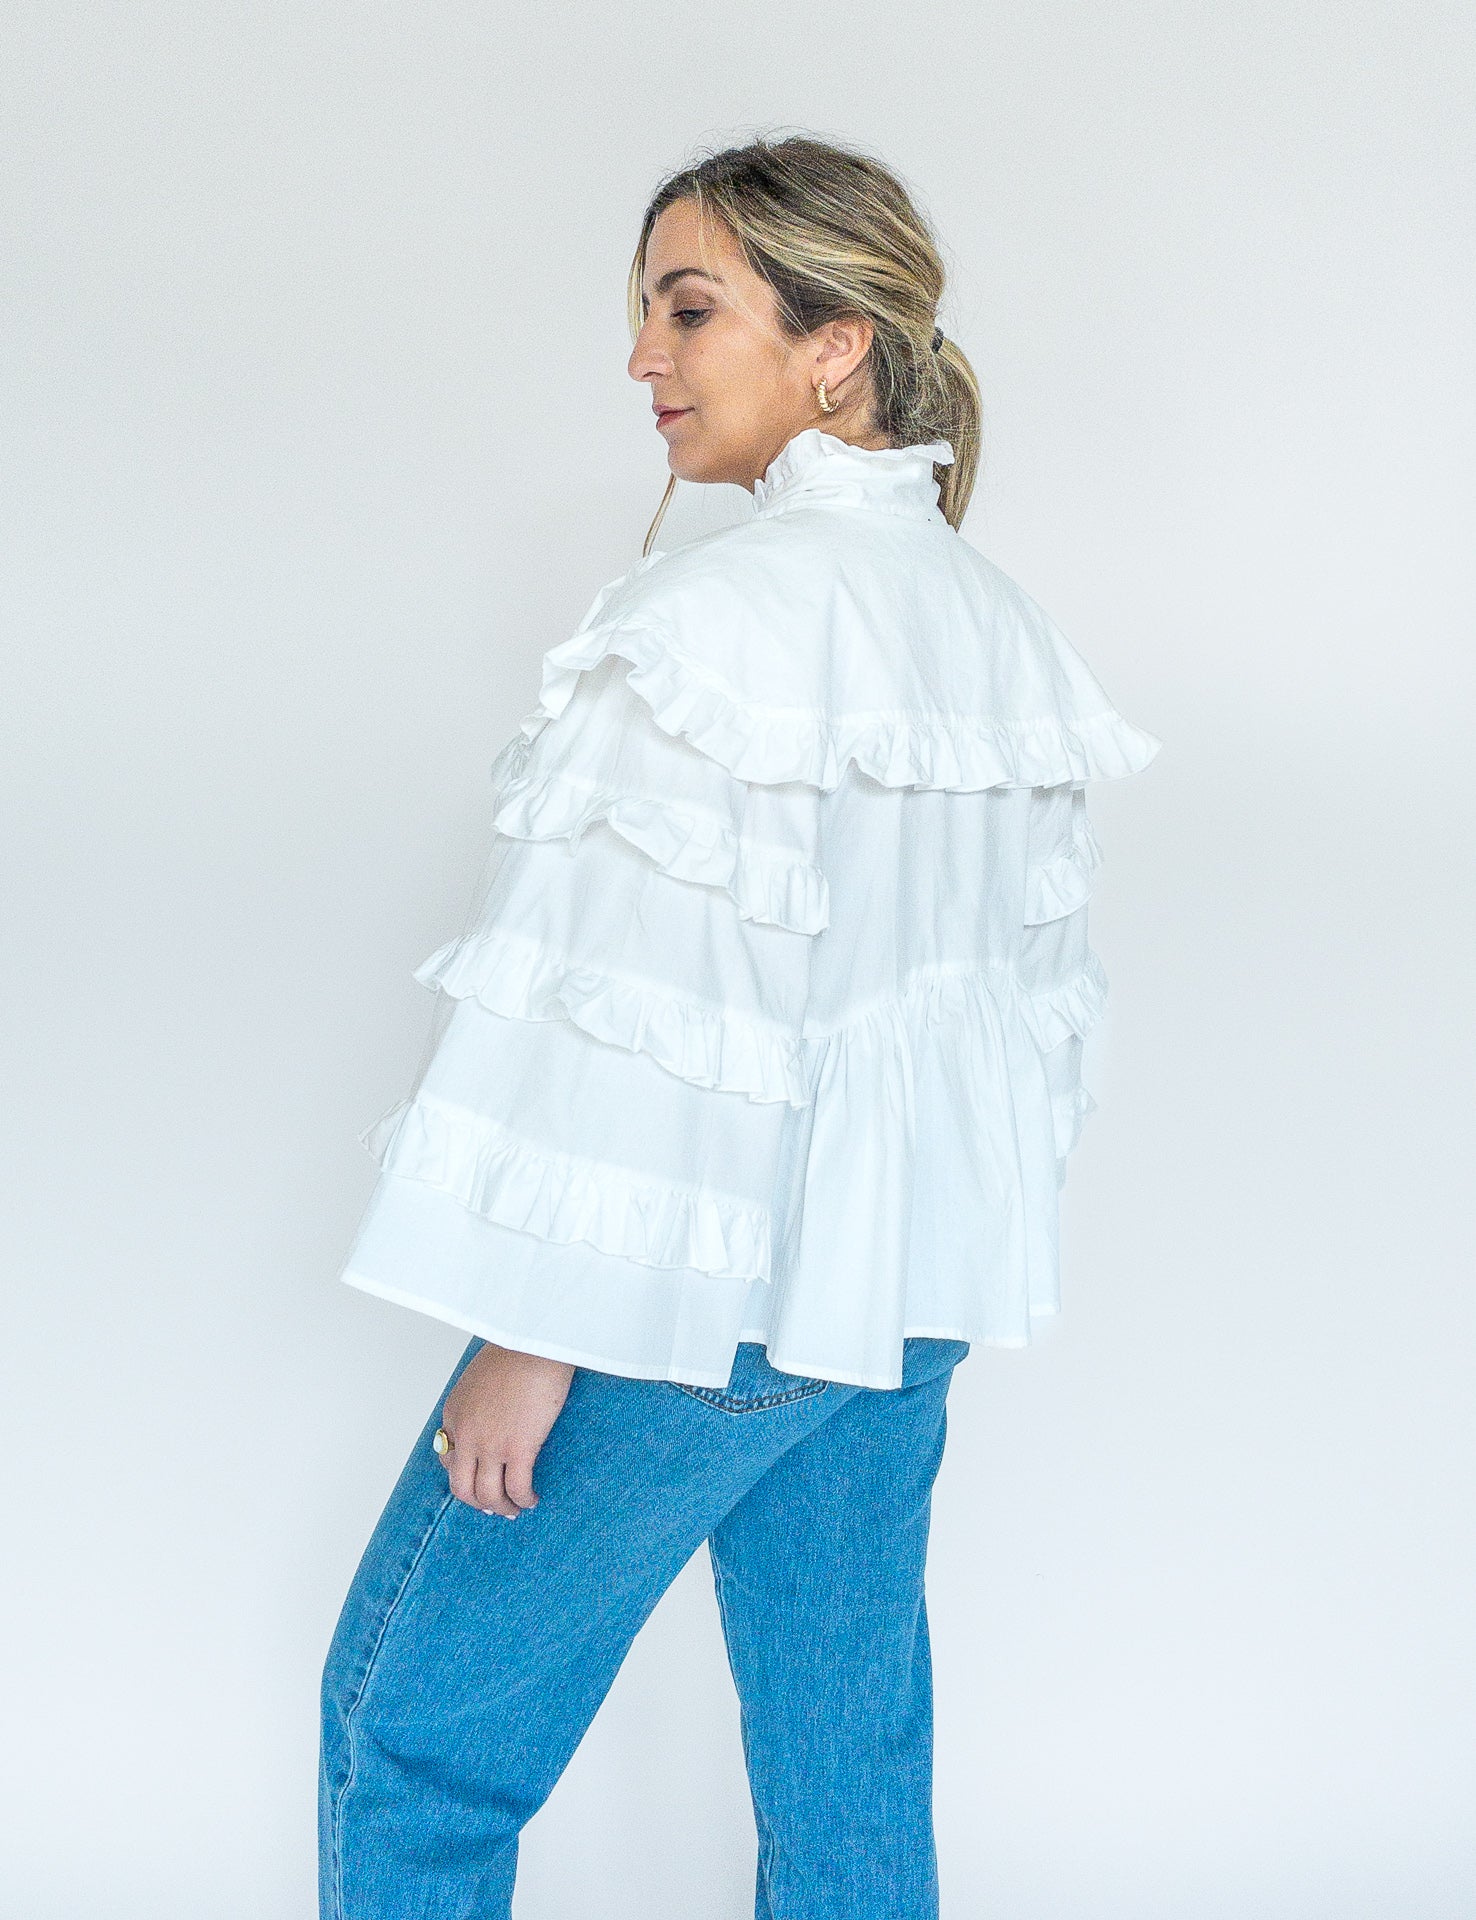 sister jane, metropolis bow ruffle blouse, white, women's blouse, spanish blouse, bow blouse, fashion, apparel, ethically made, curate, shopthecurate